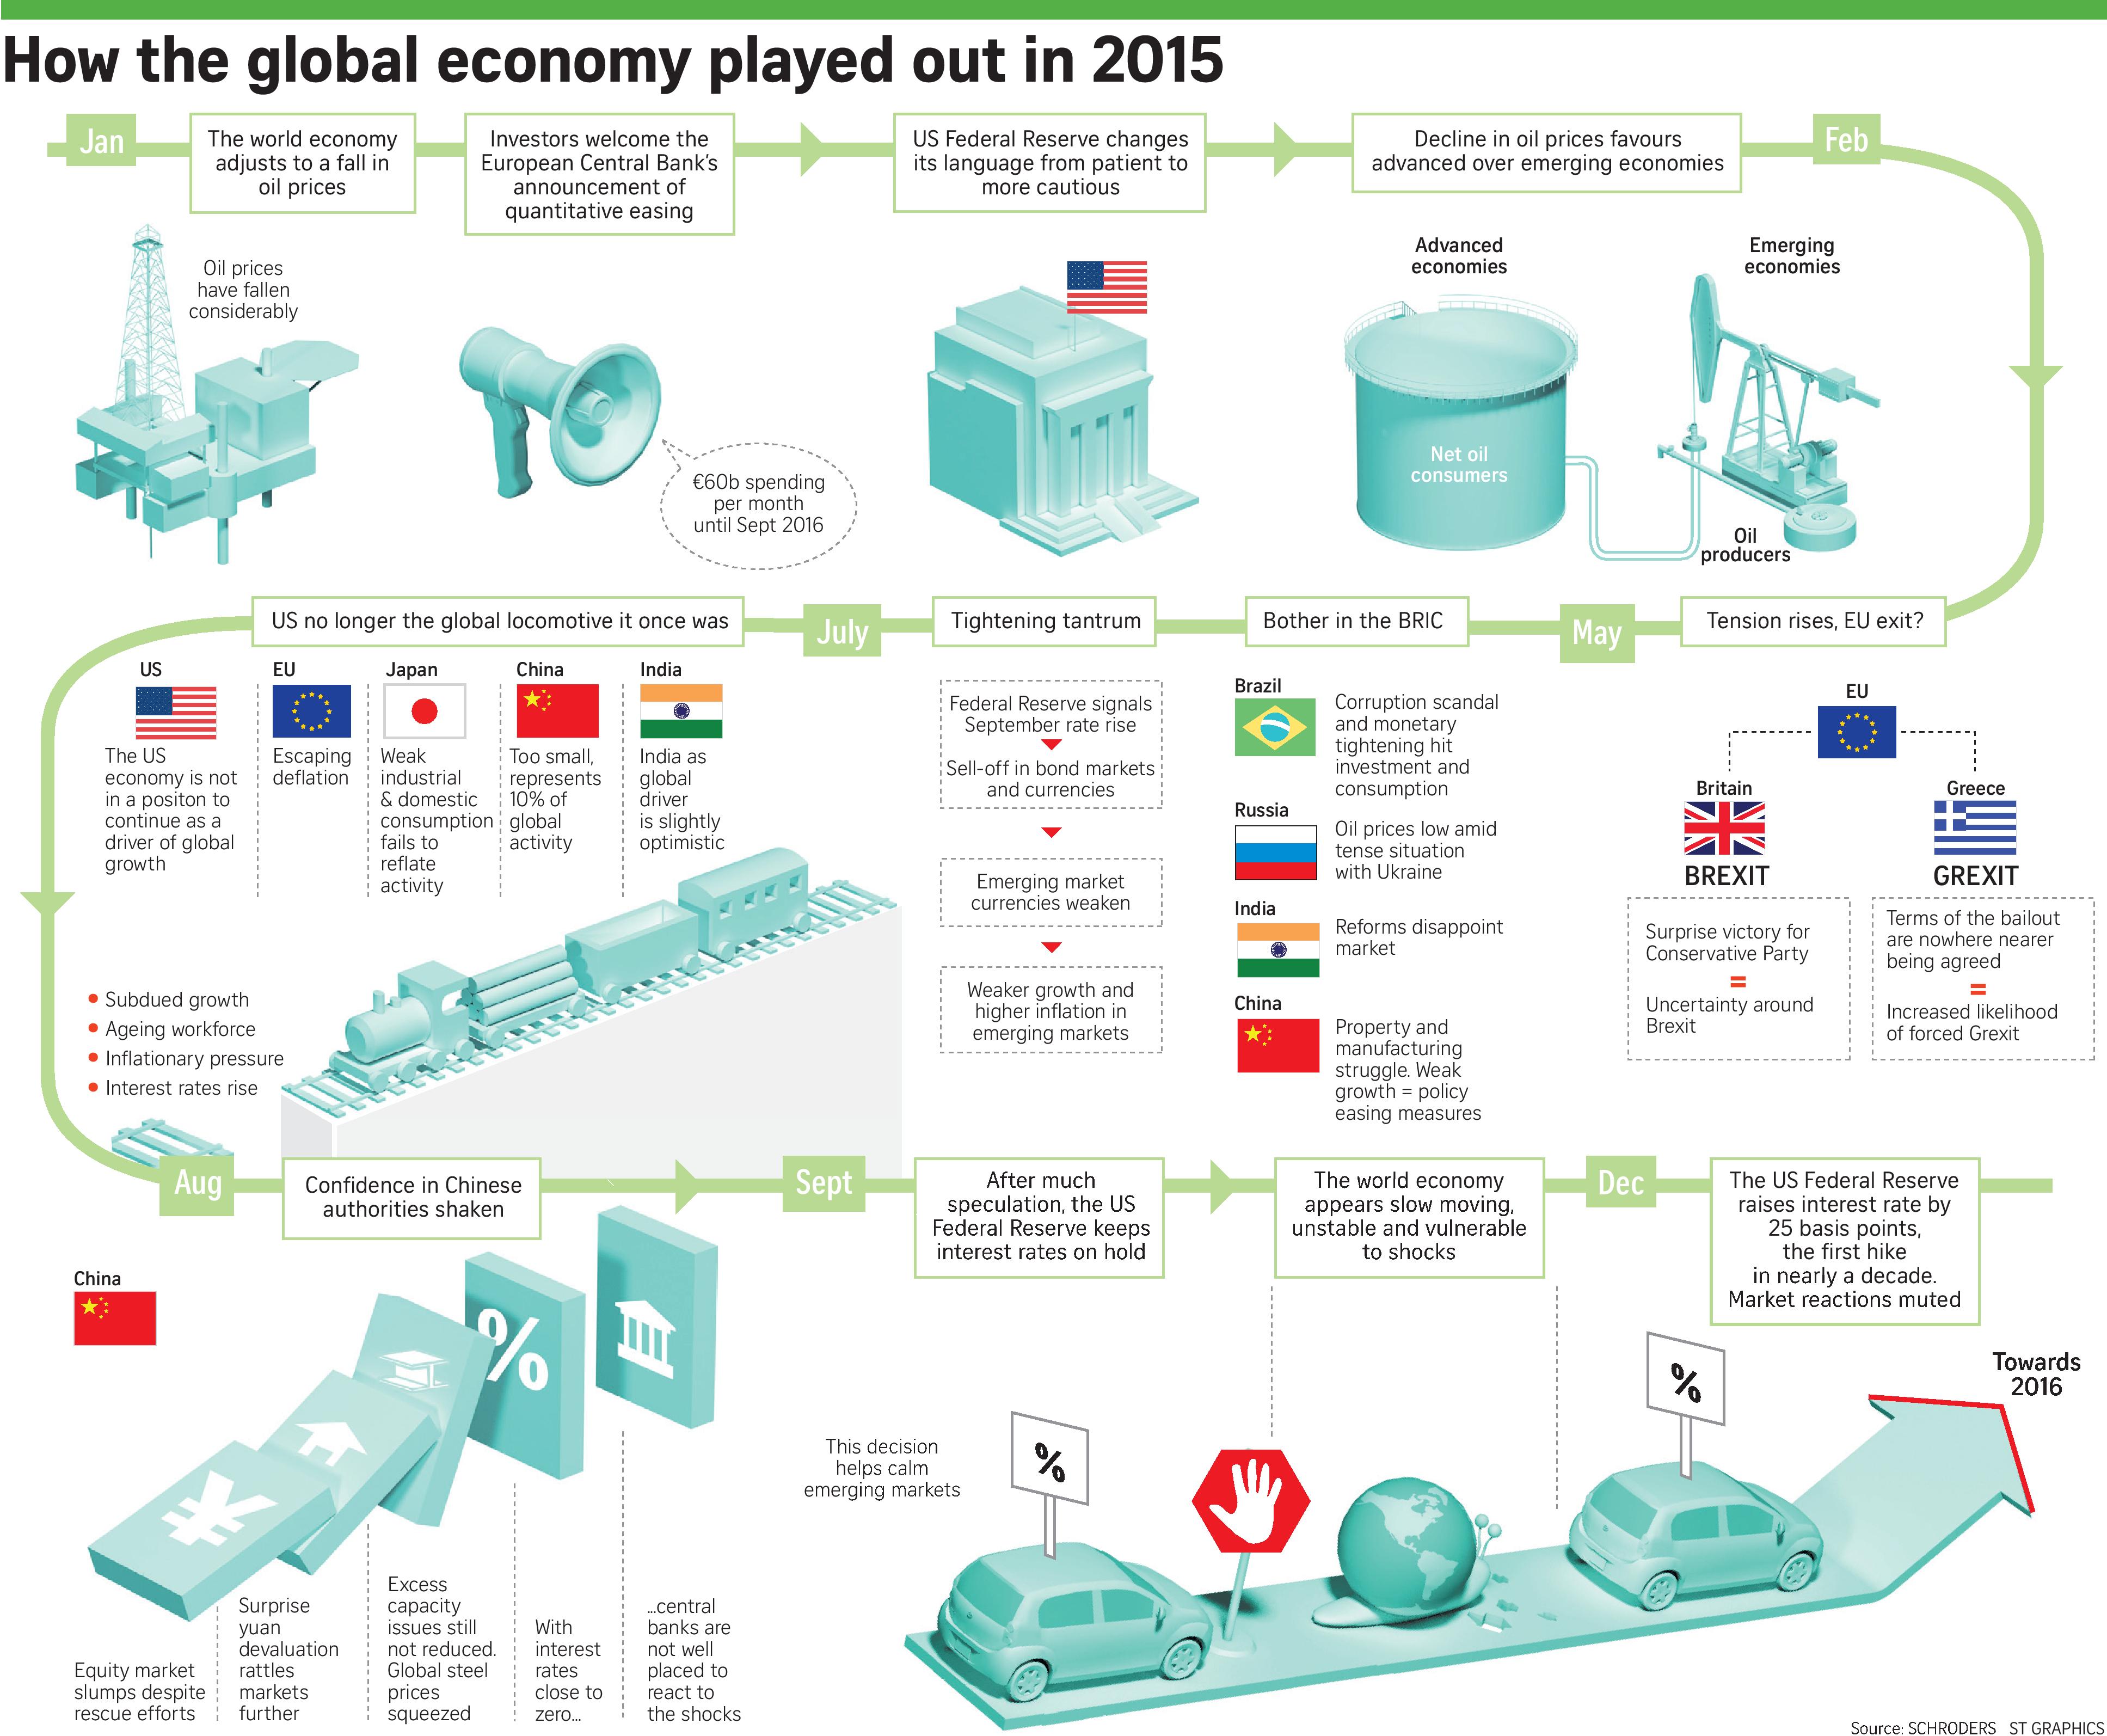 37069848_-_30_12_2015_-_20.52.20_-_new_151230_2015_global_economy_tien-page-001.jpg